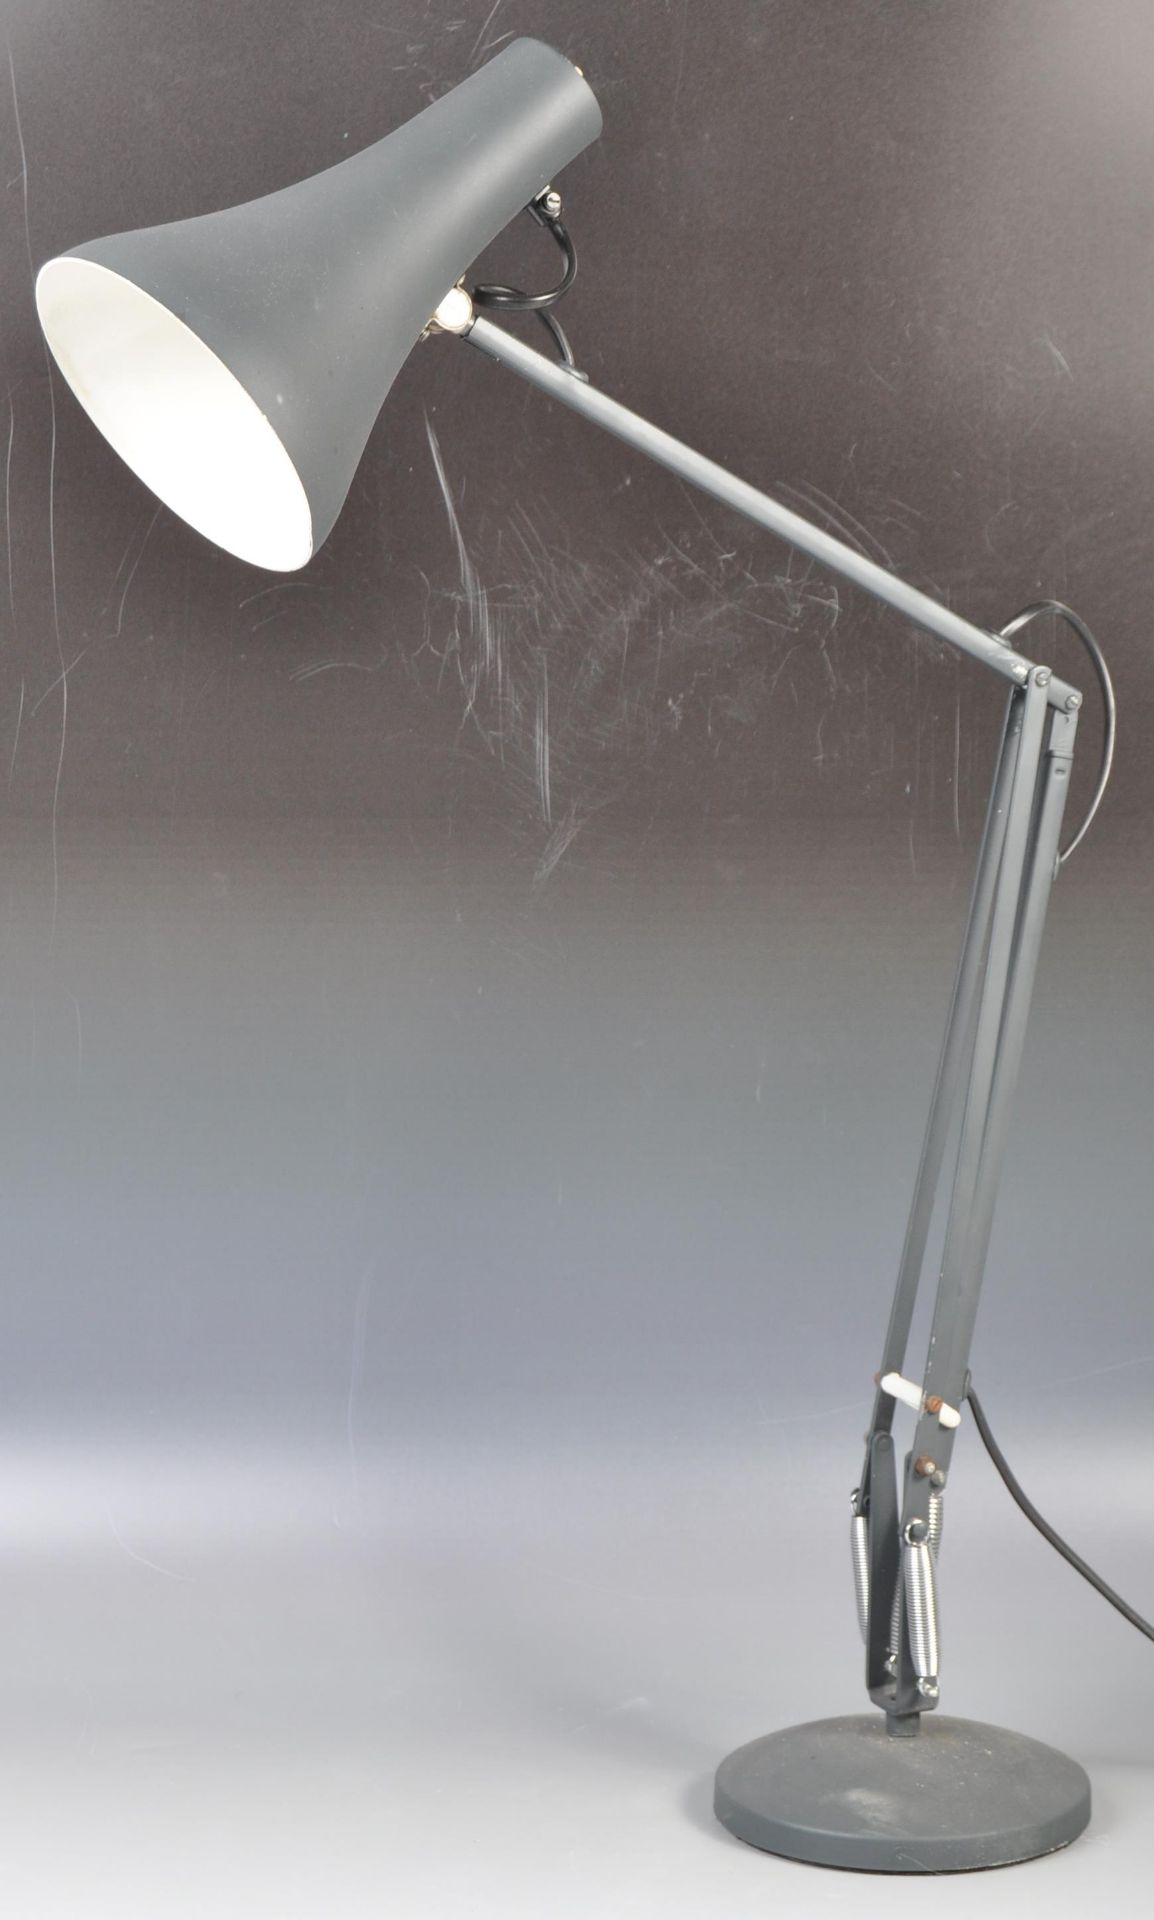 HERBERT TERRY MODEL 90 ANGLEPOISE TABLE LAMP FINISHED IN GREY